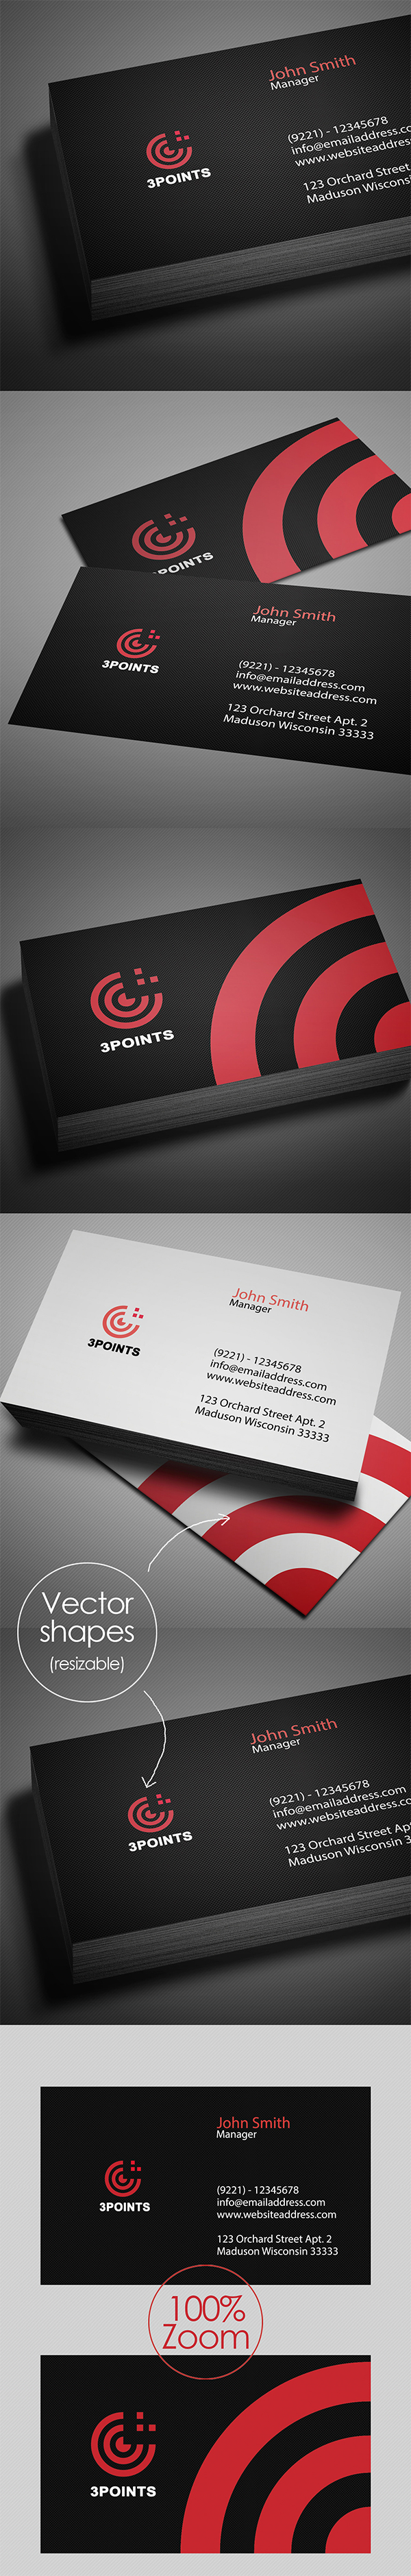 Free Clean Business Card PSD Template